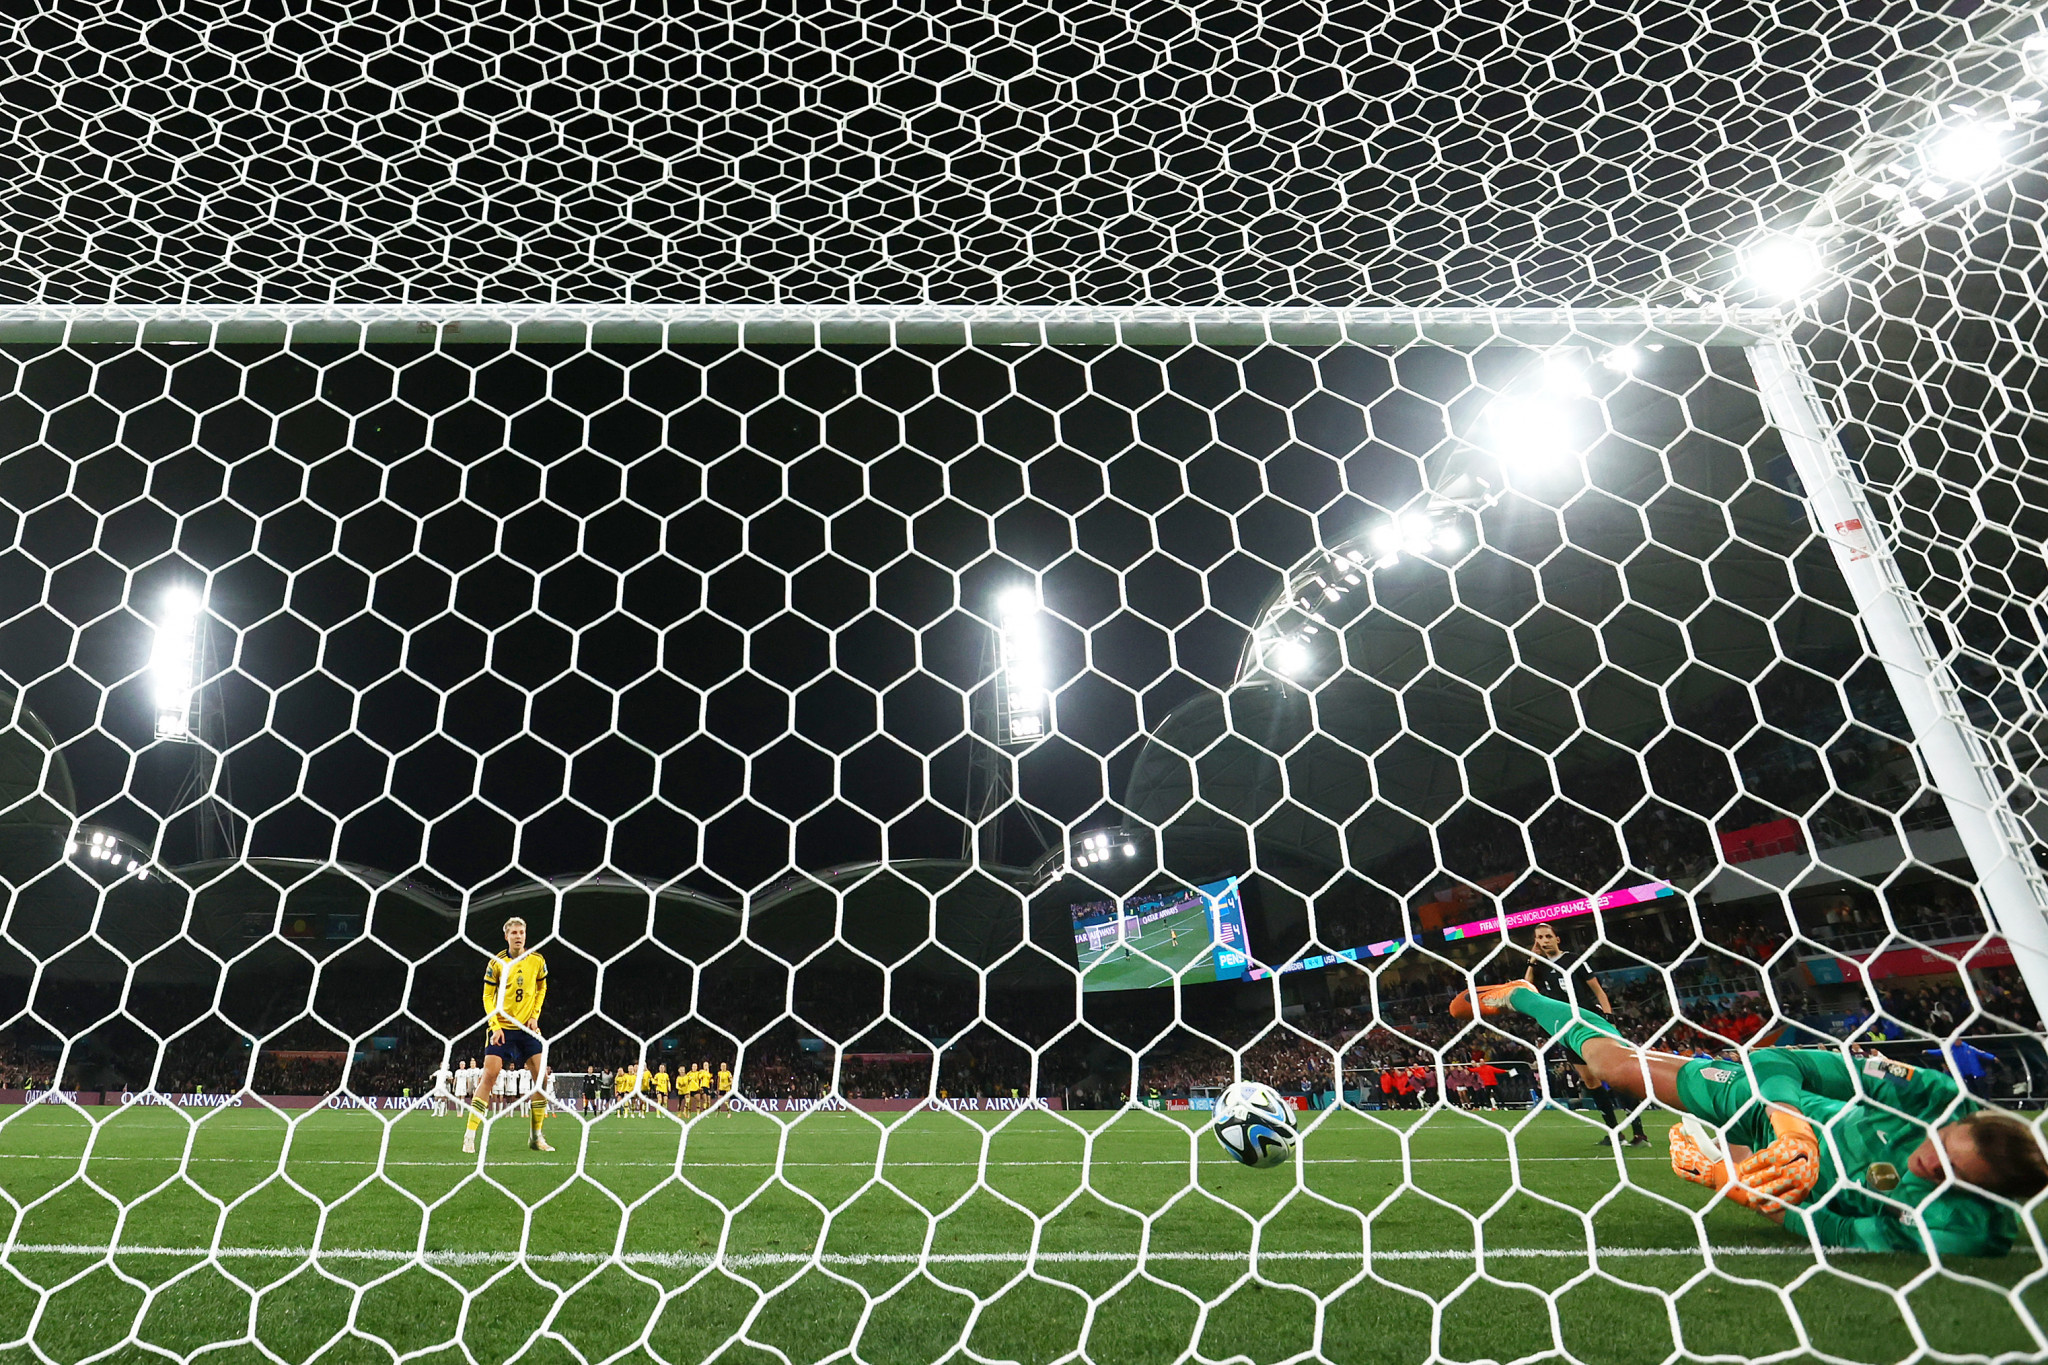 ABBA penalty shoot-out format: Here is a simple explainer